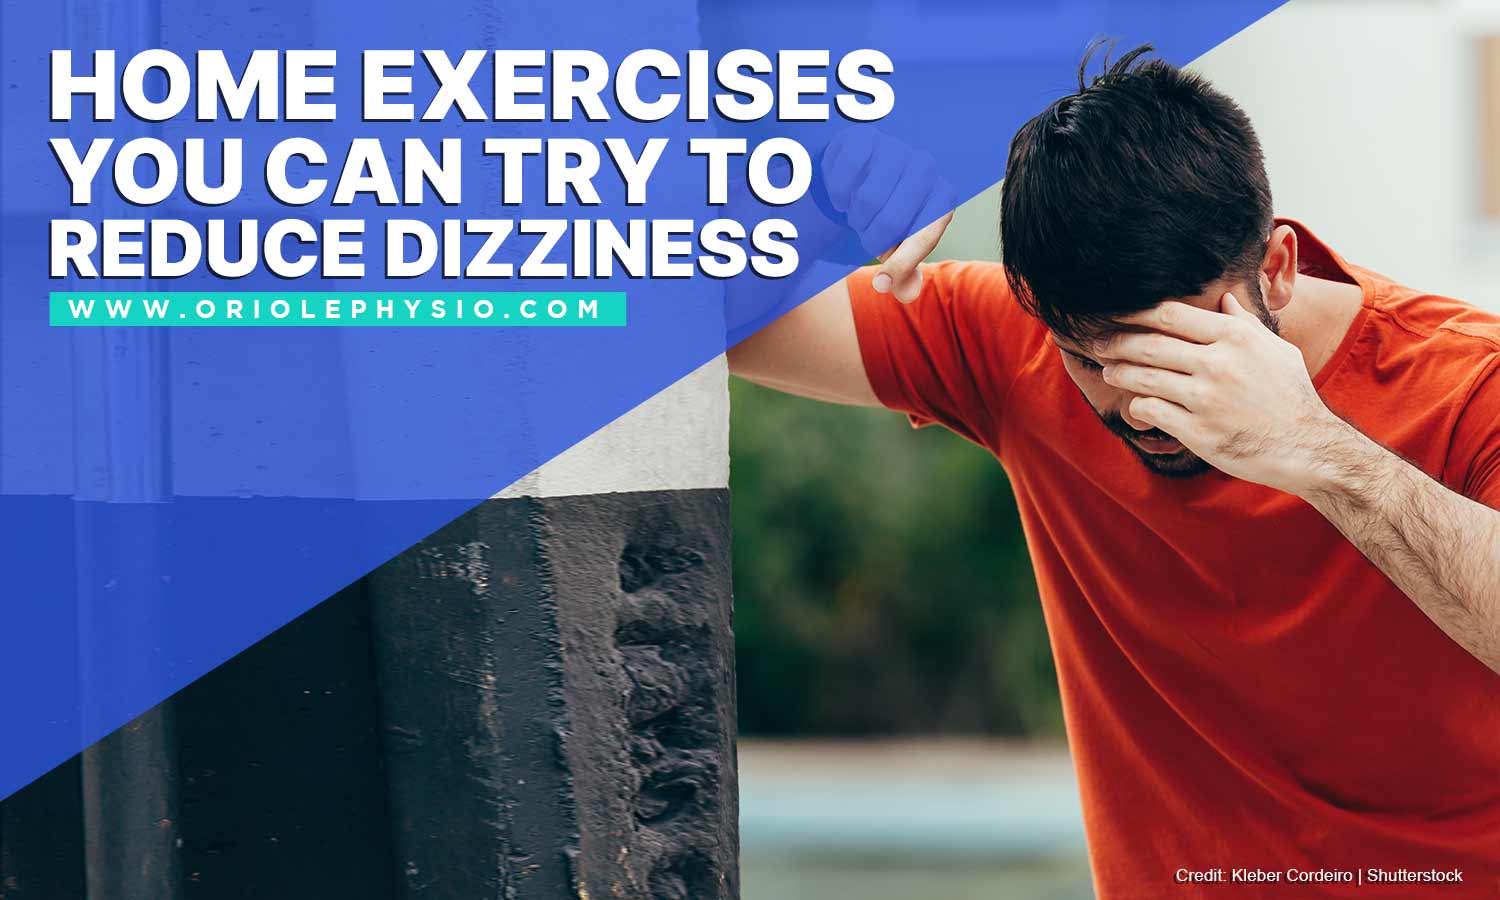 Home Exercises You Can Try to Reduce Dizziness